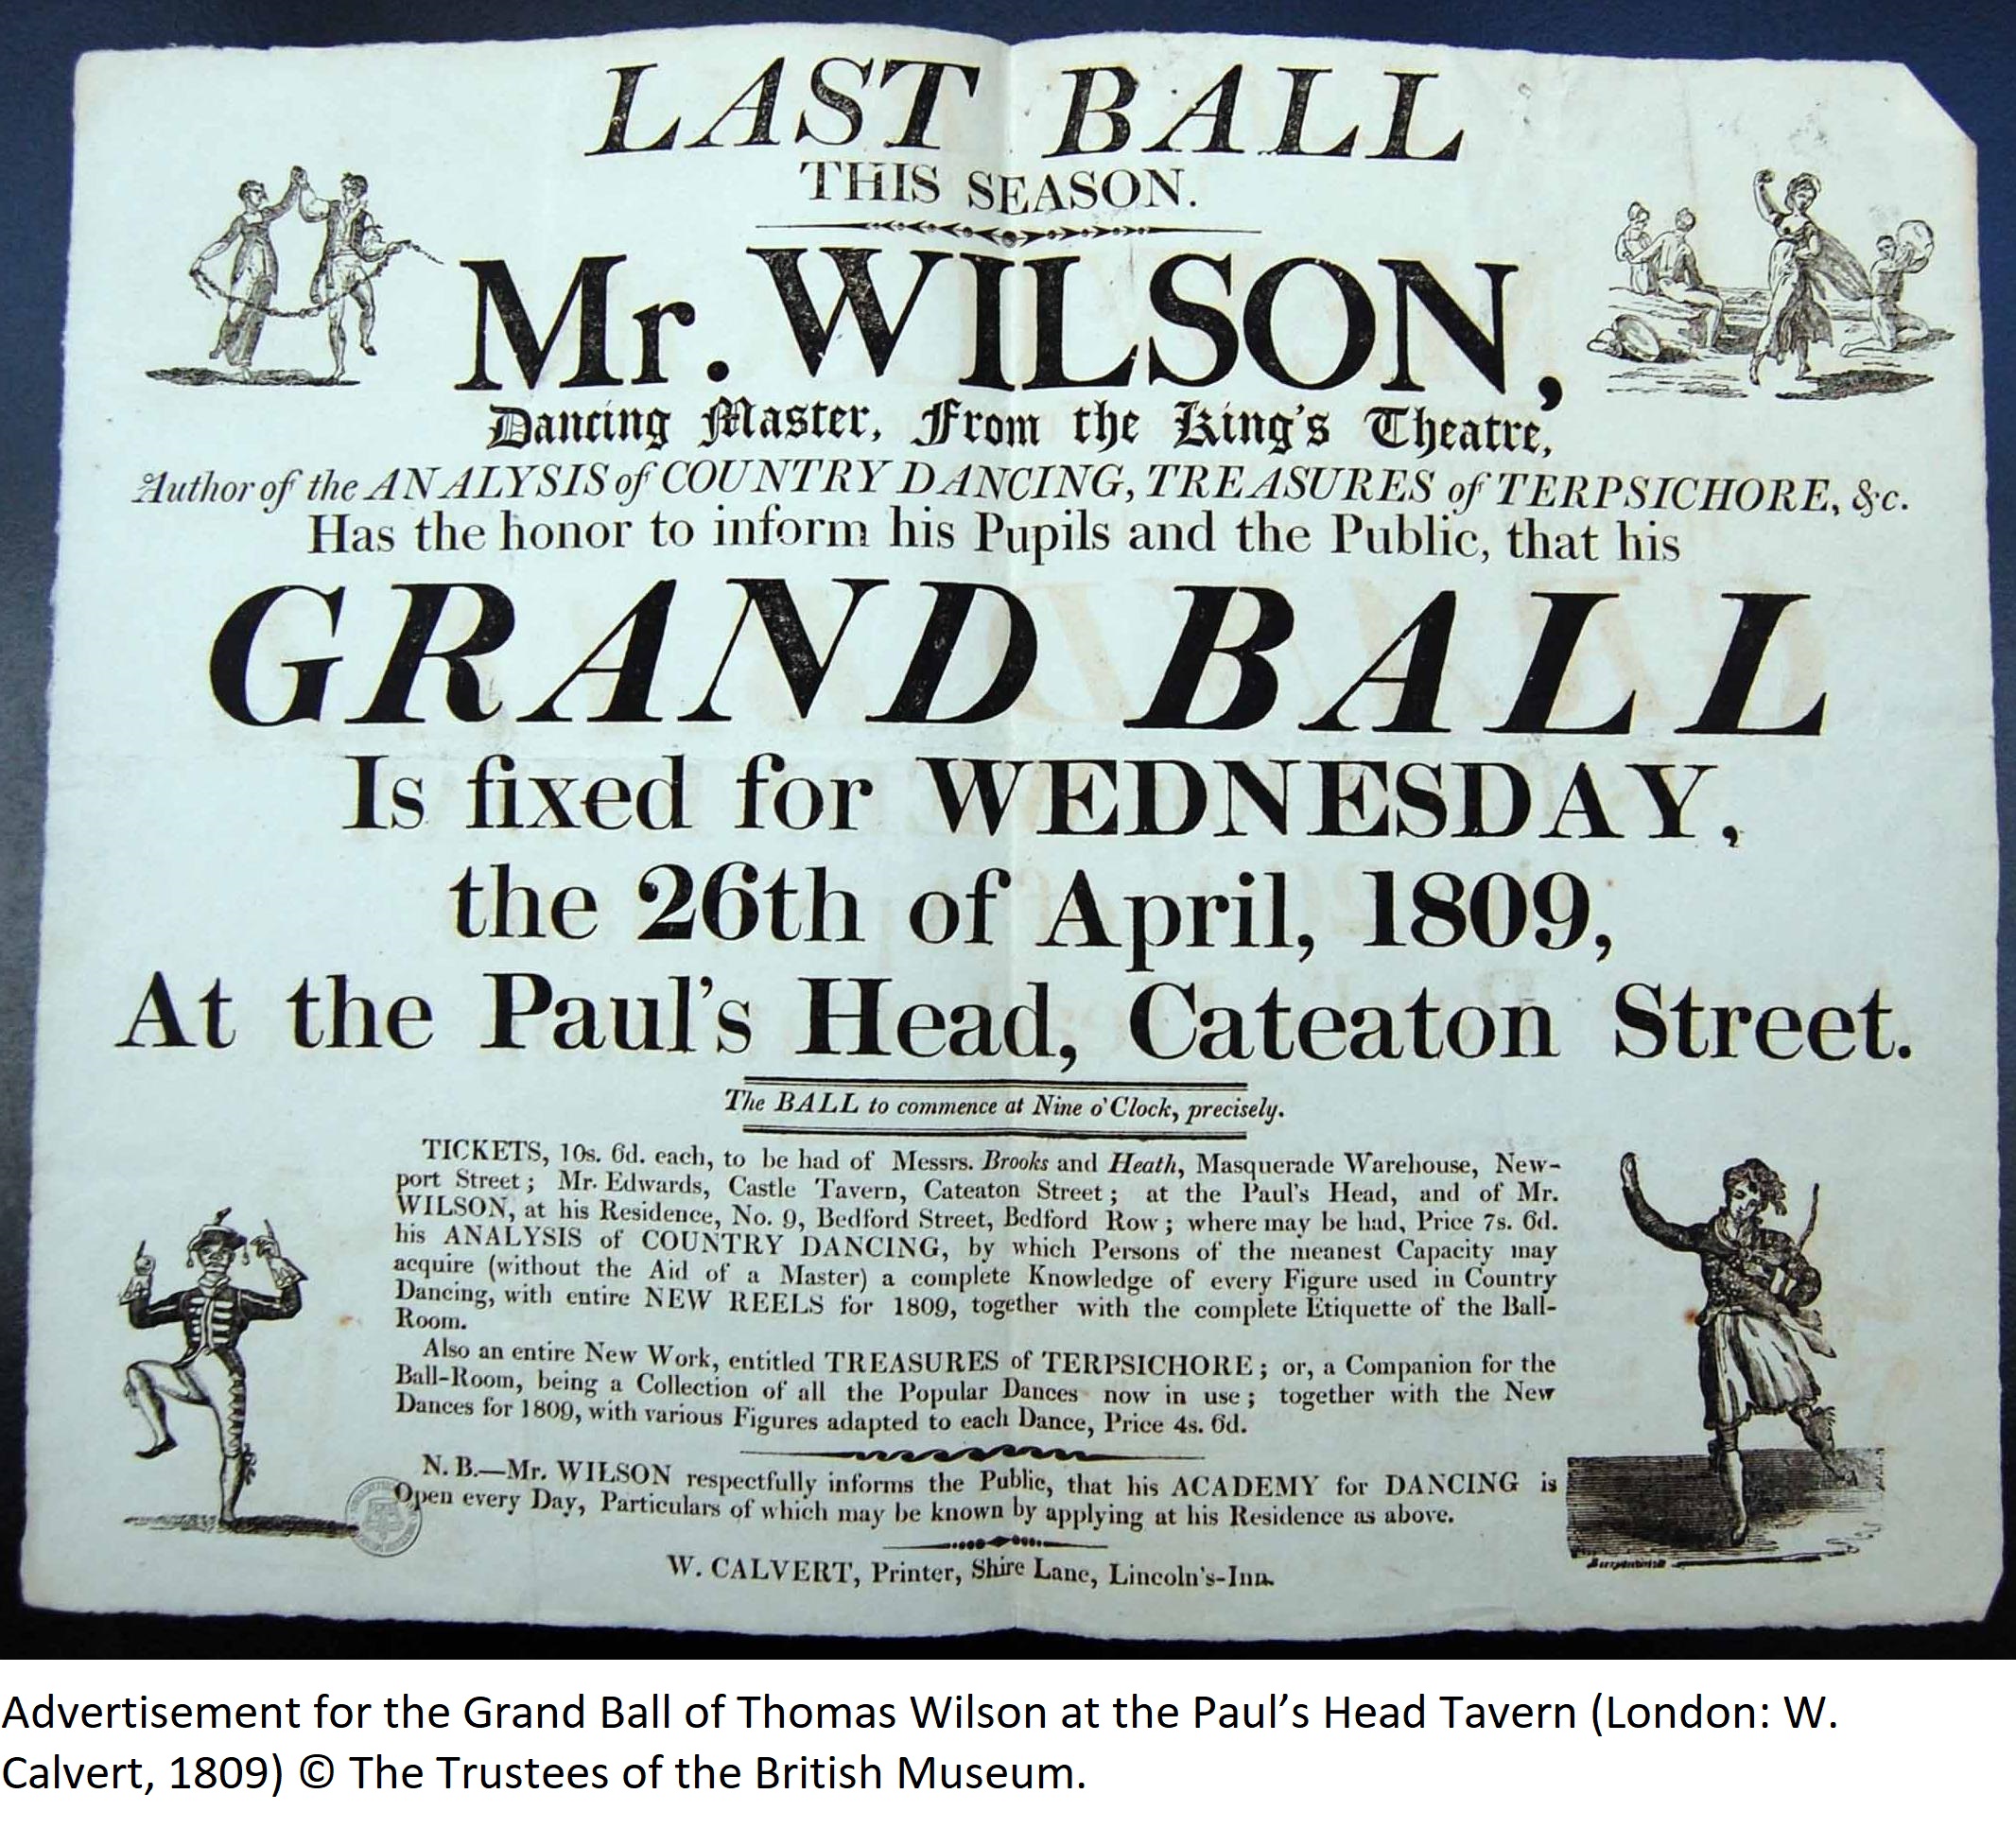 Advertisement for the Grand Ball of Thomas Wilson at the Paul’s Head Tavern (London: W. Calvert, 1809) © The Trustees of the British Museum.